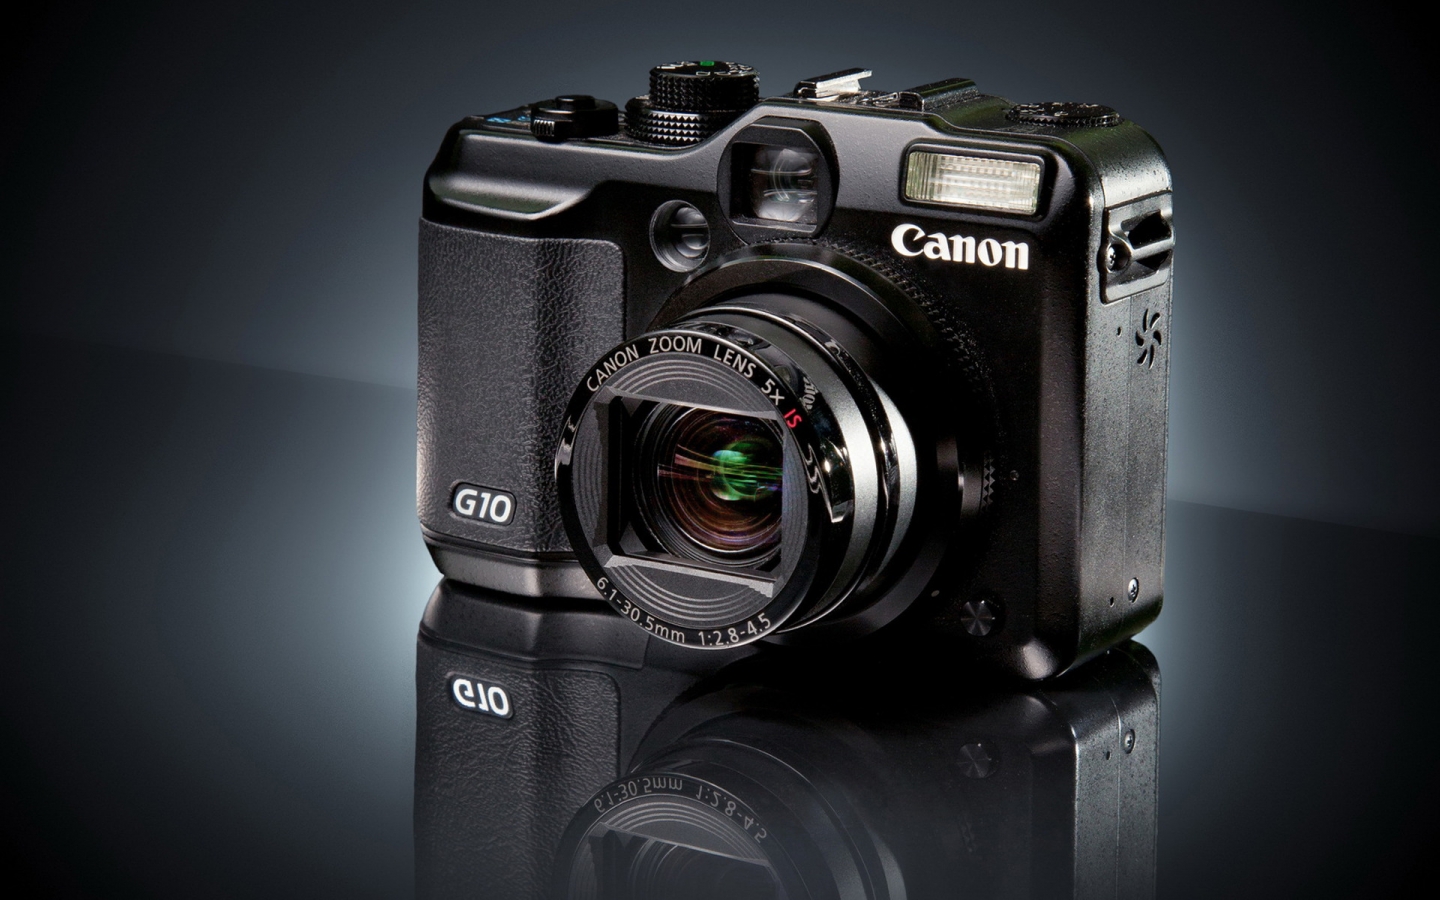 Canon G10 for 1440 x 900 widescreen resolution